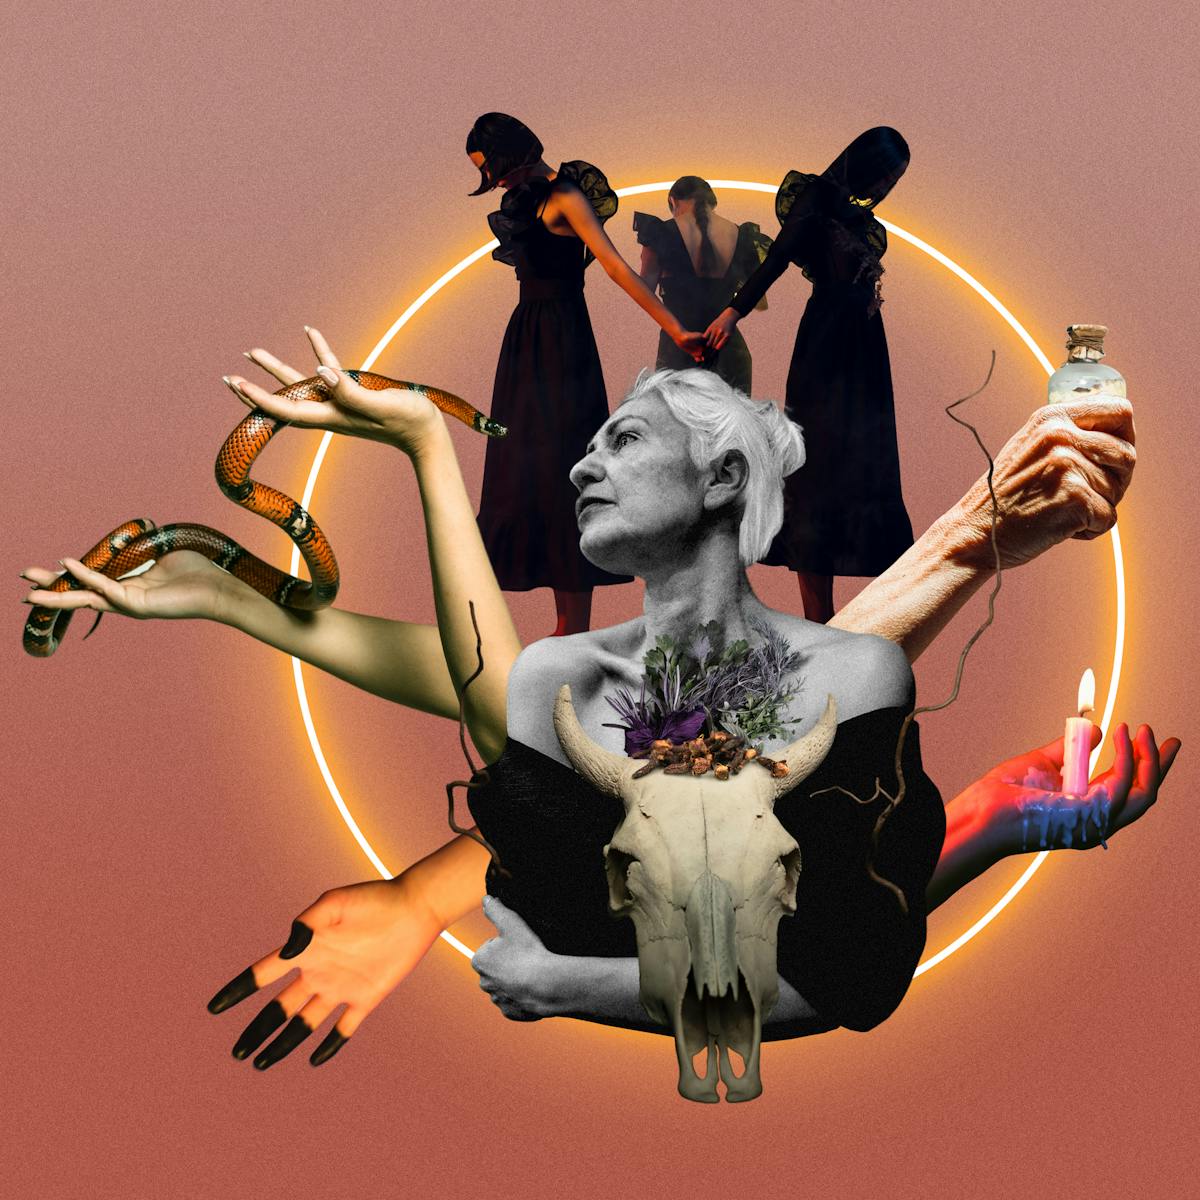 Digital collage artwork made up of red, orange and black and white hues. A cluster of collaged element at the centre of the image sit within a glowing circular yellow line. The atmosphere is one of the occult and witchcraft, with hands holding serpents, bottles filled with potions, candles and animal skulls.